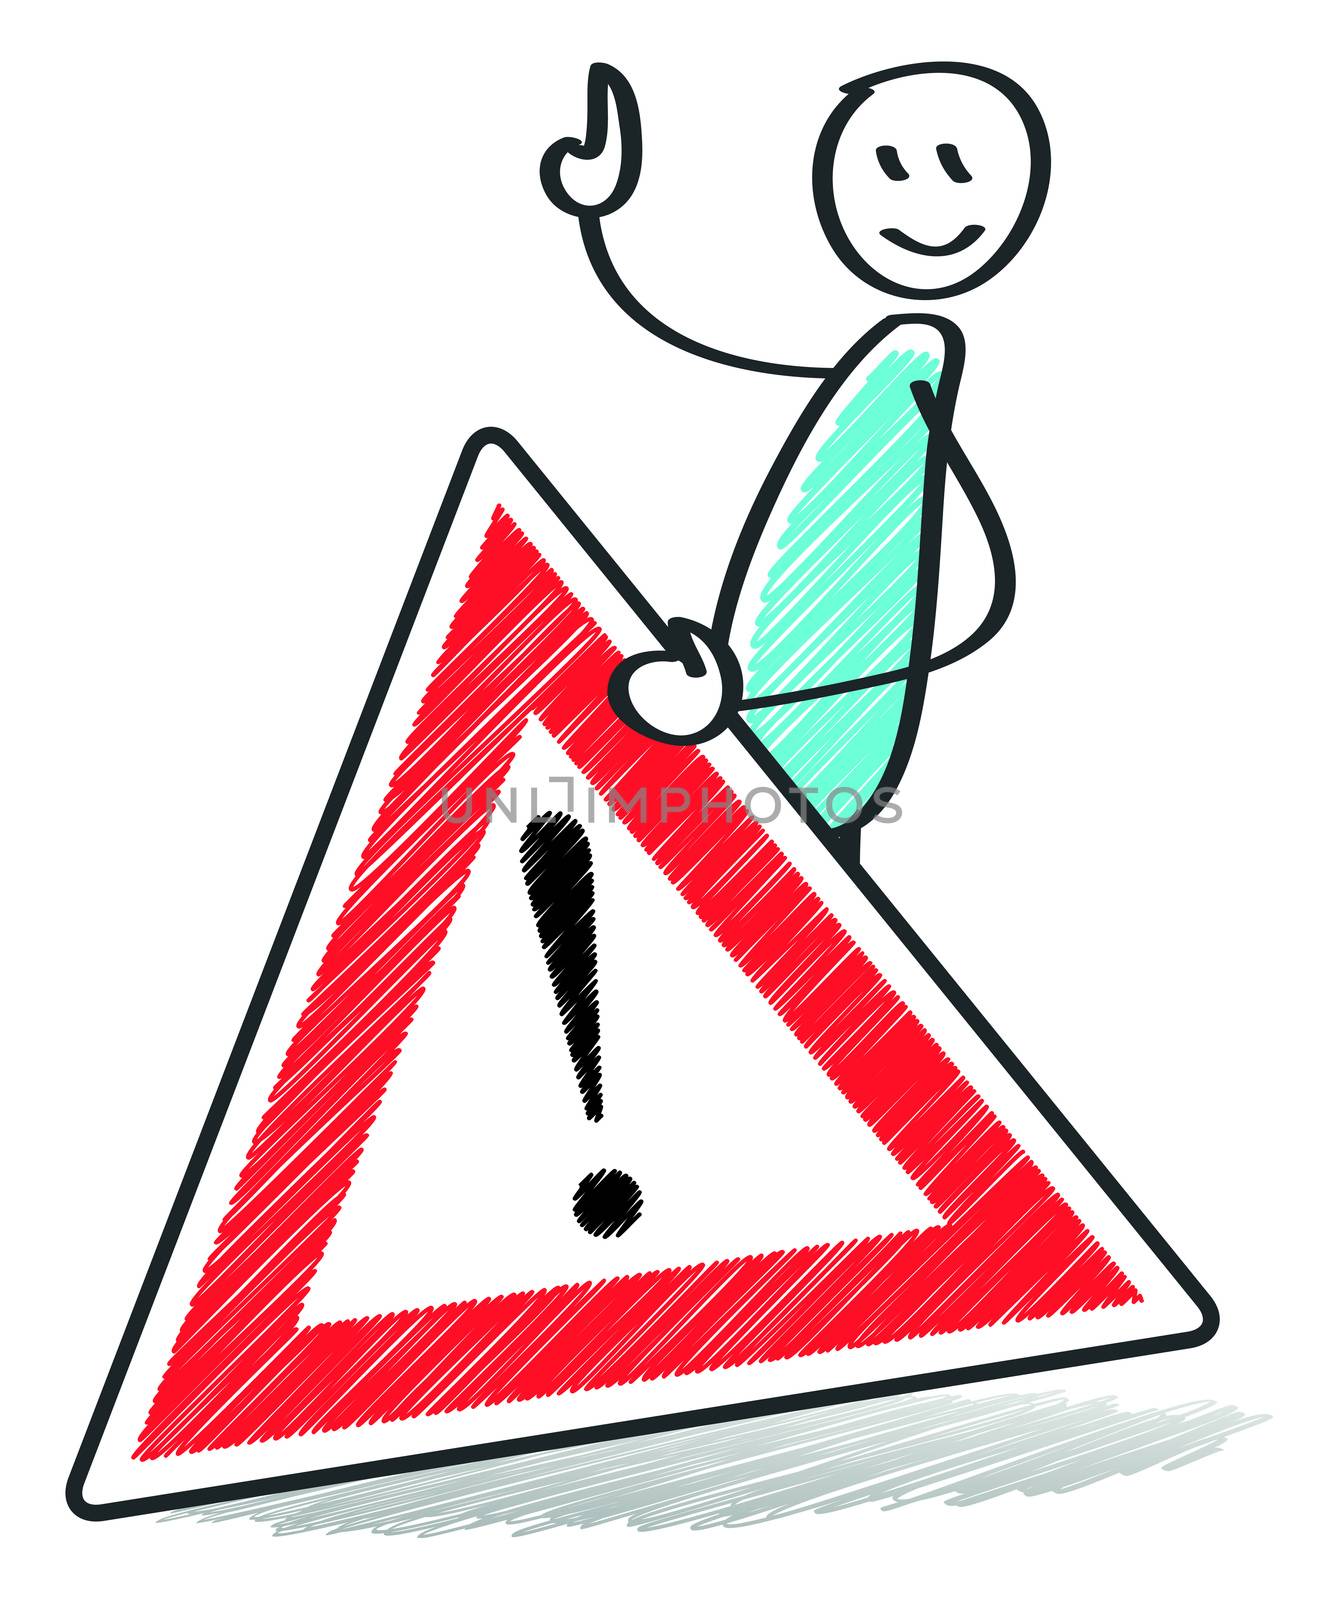 An image of a warning sign with a stick man